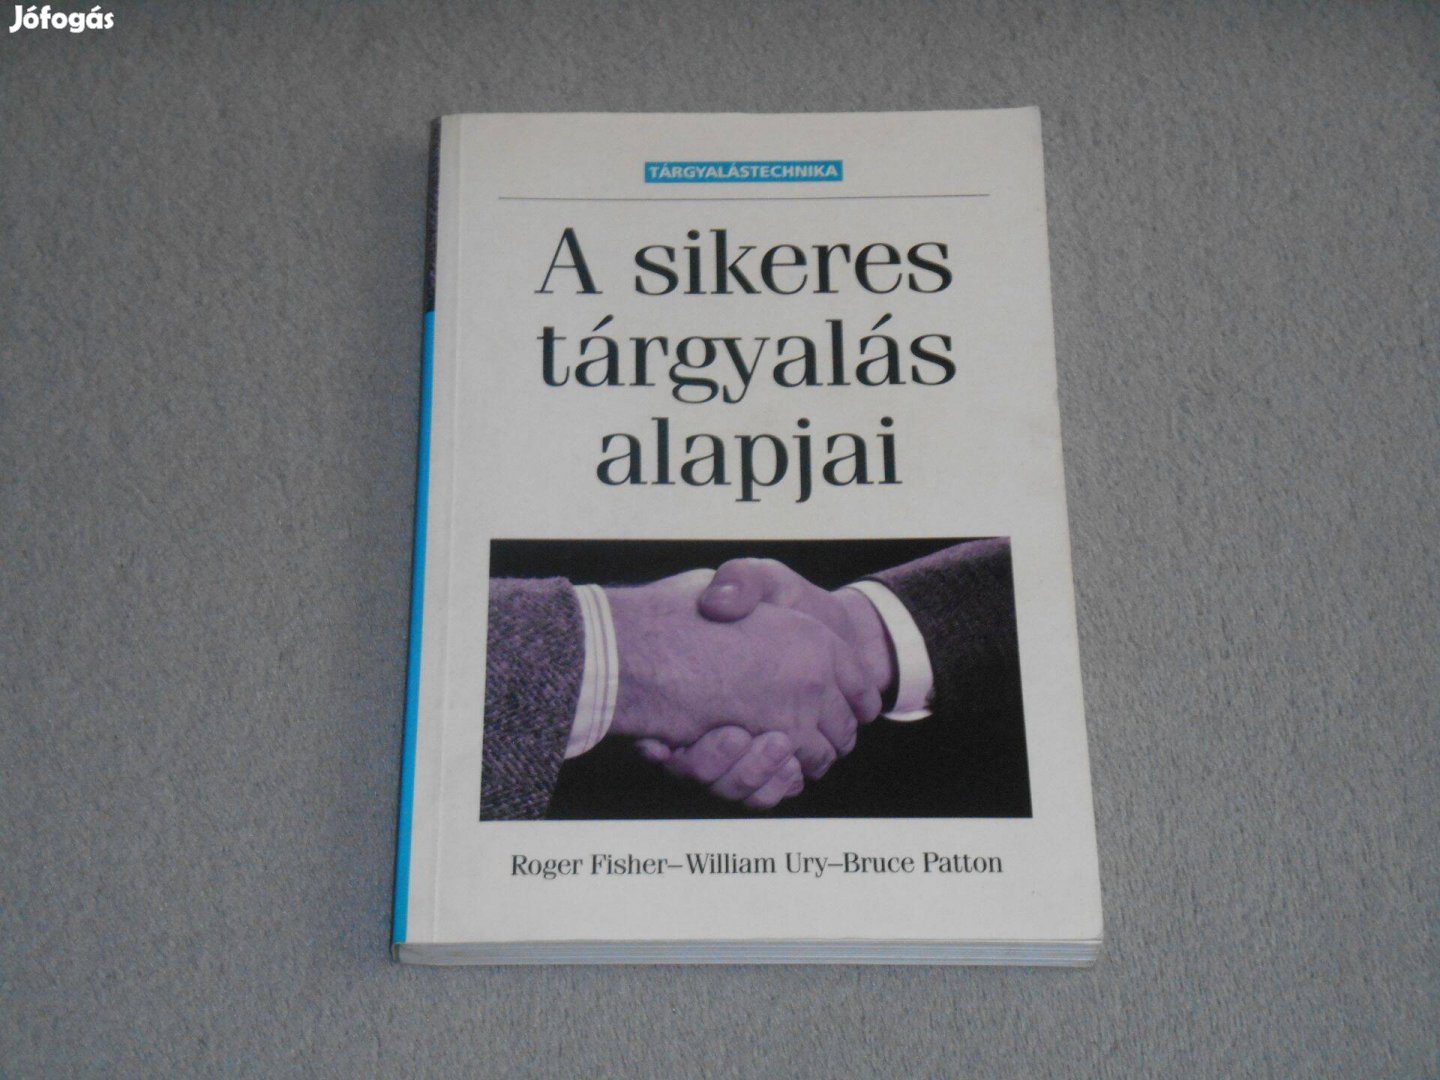 Roger Fisher, William Ury, Bruce Patton - A sikeres tárgyalás alapjai